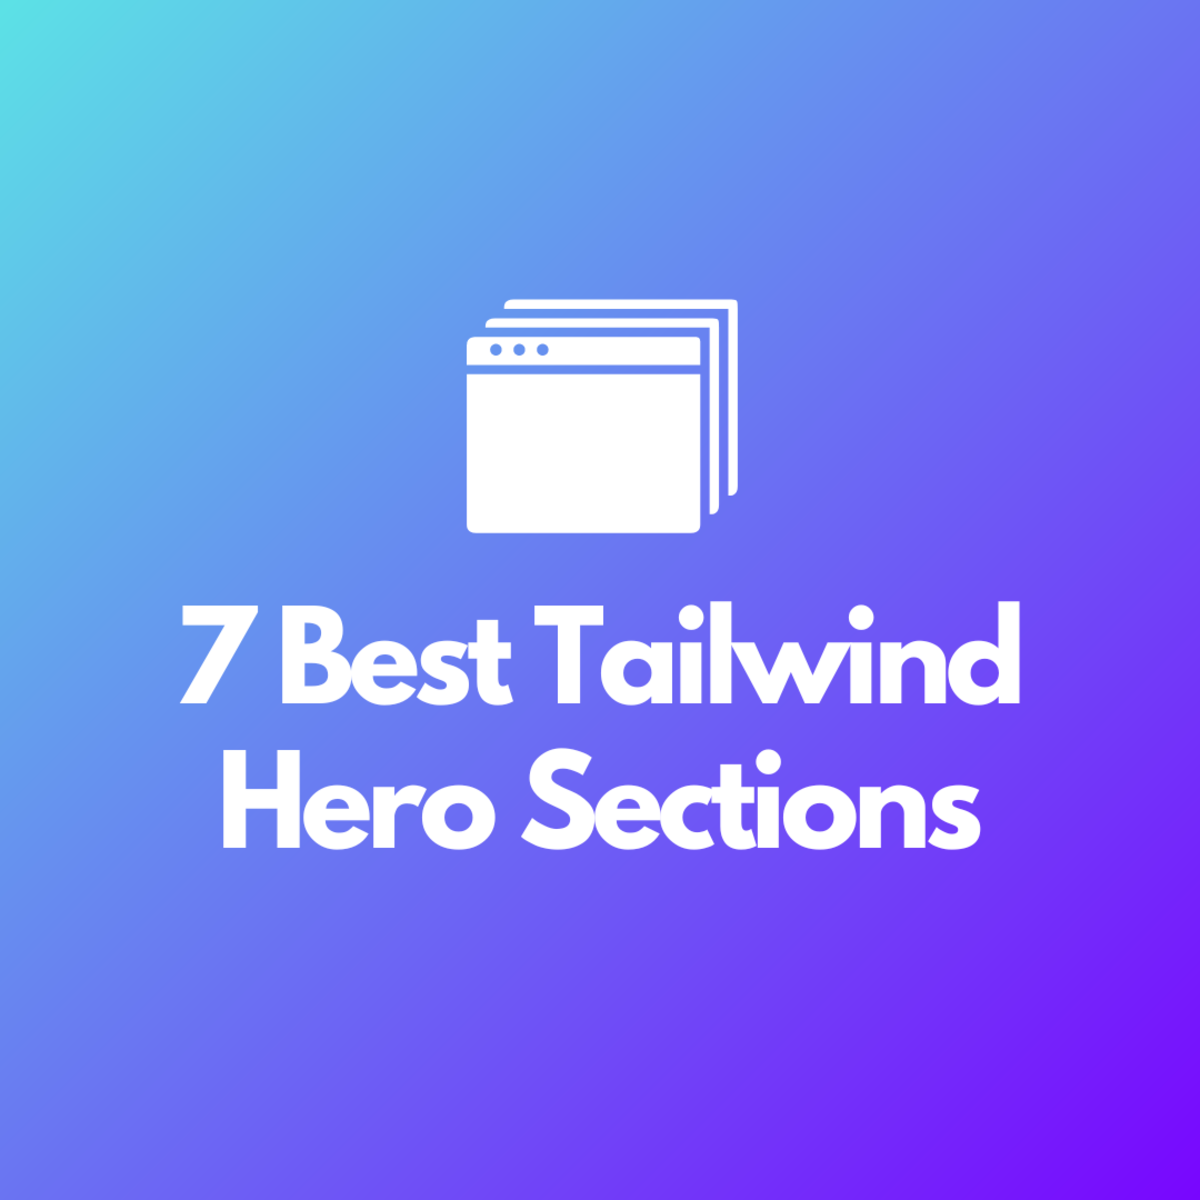 7 Best Tailwind Hero Sections to Add to Your Project: The Ultimate Guide